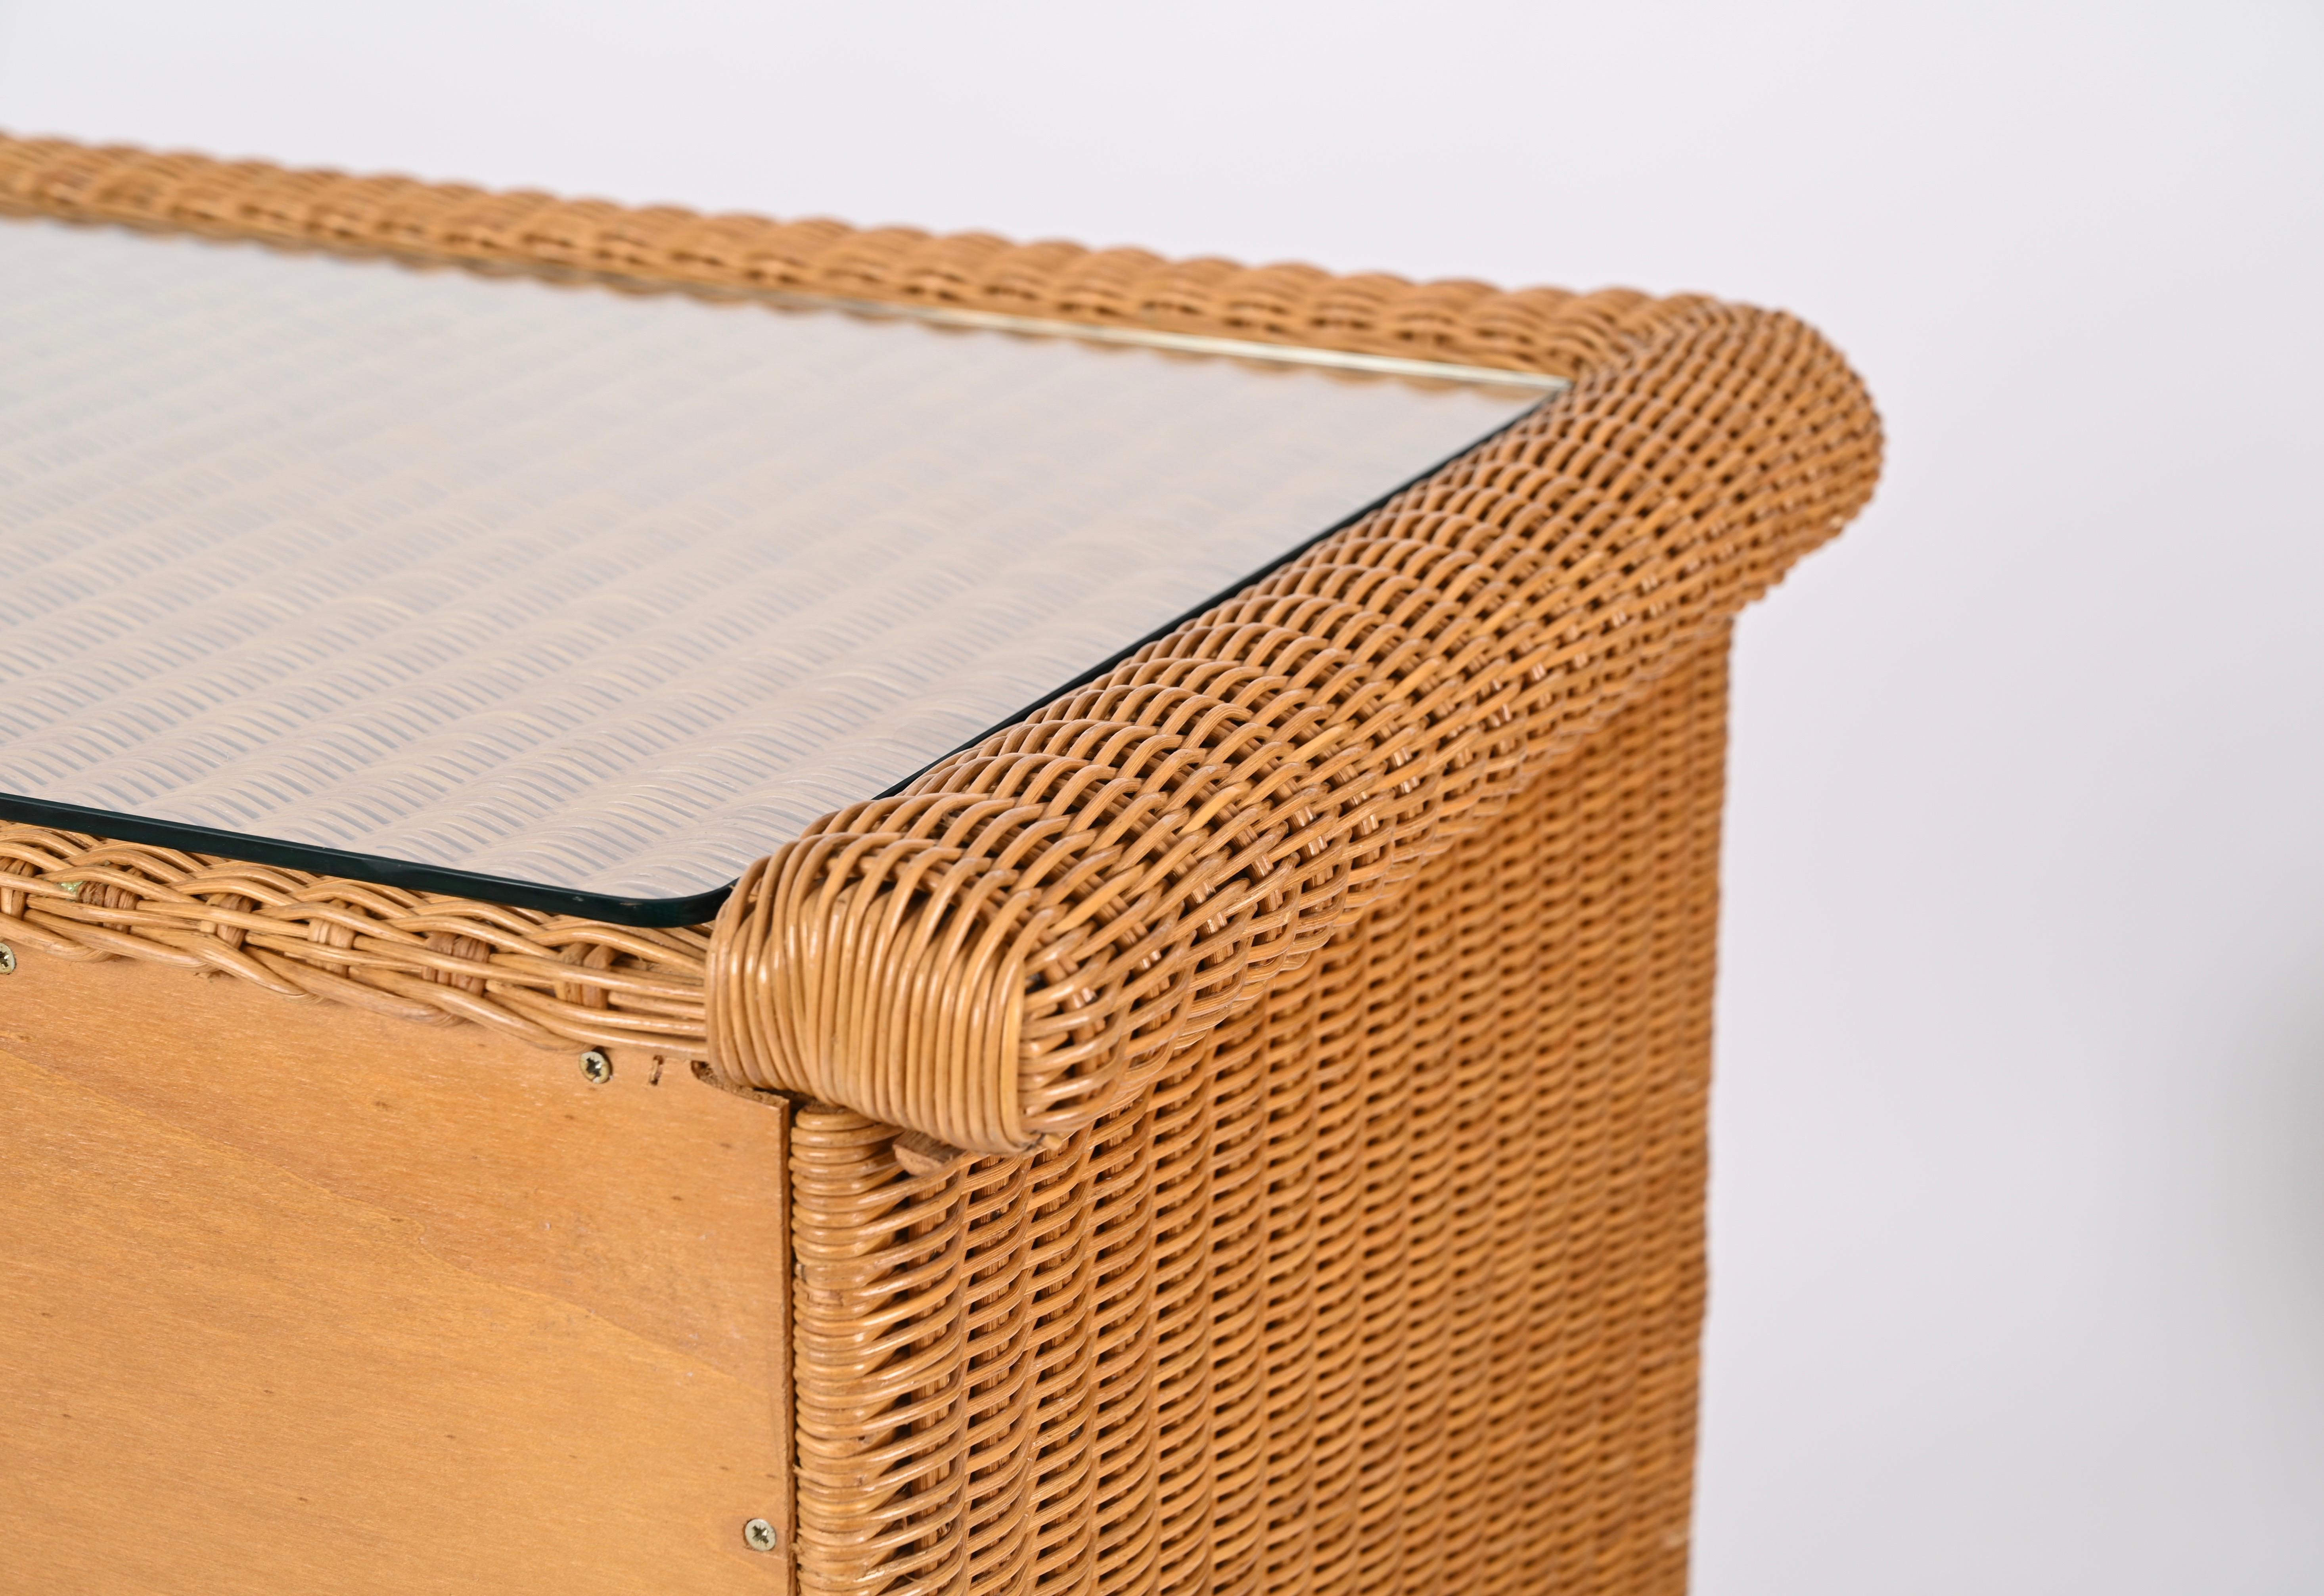 French Riviera Chest of Drawers in Woven Rattan by Vivai del Sud, Italy, 1970s For Sale 6